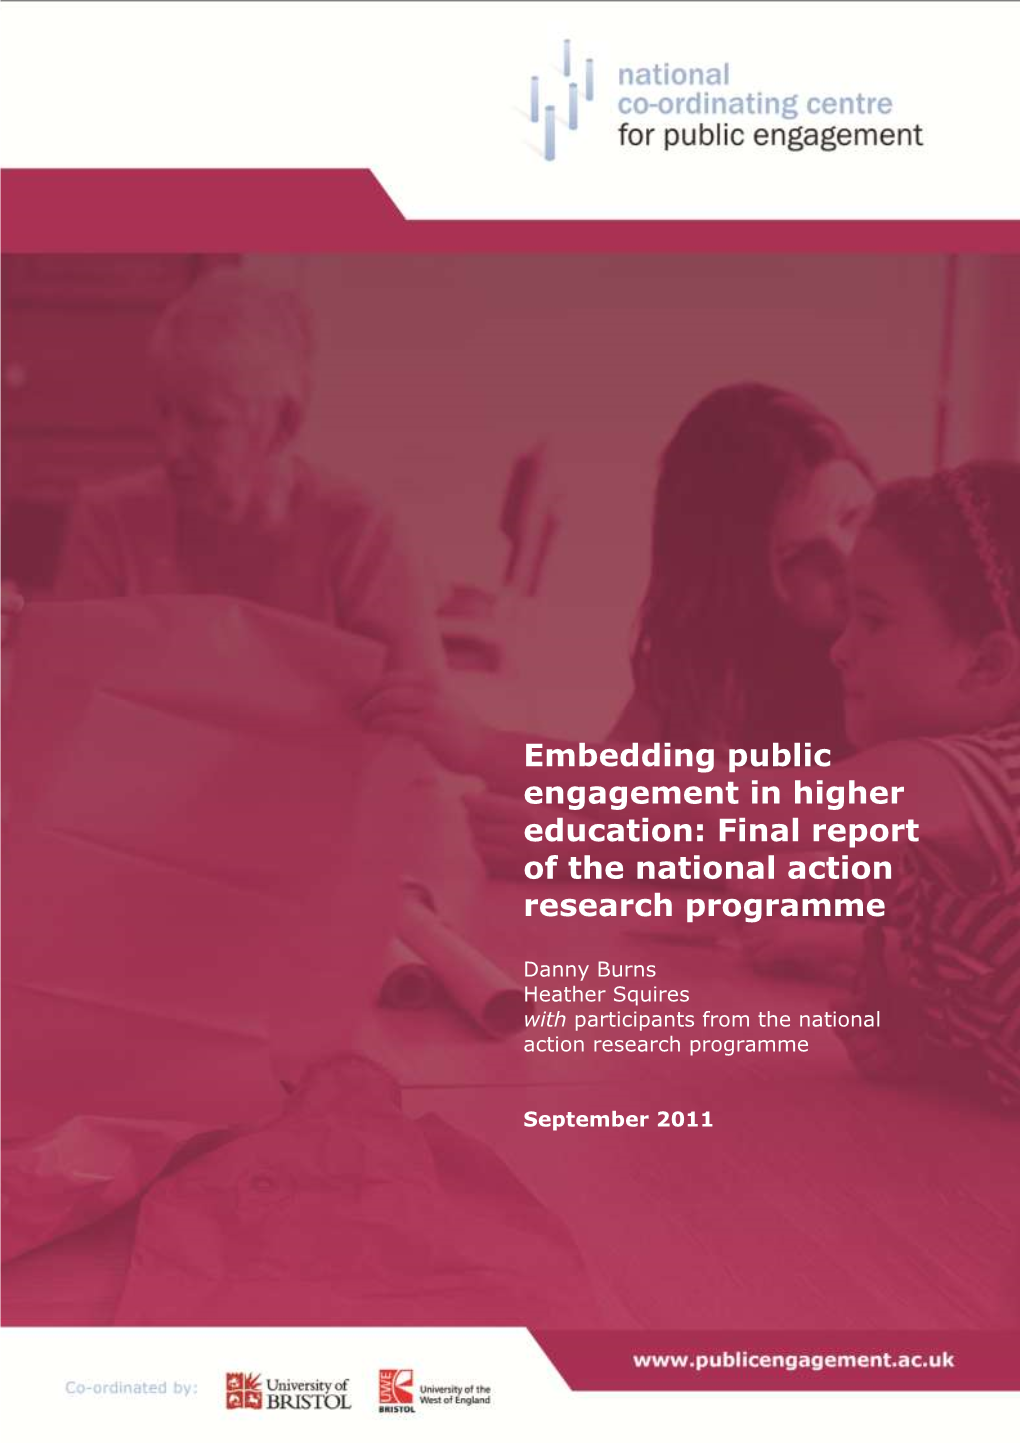 Embedding Public Engagement in Higher Education: Final Report of the National Action Research Programme